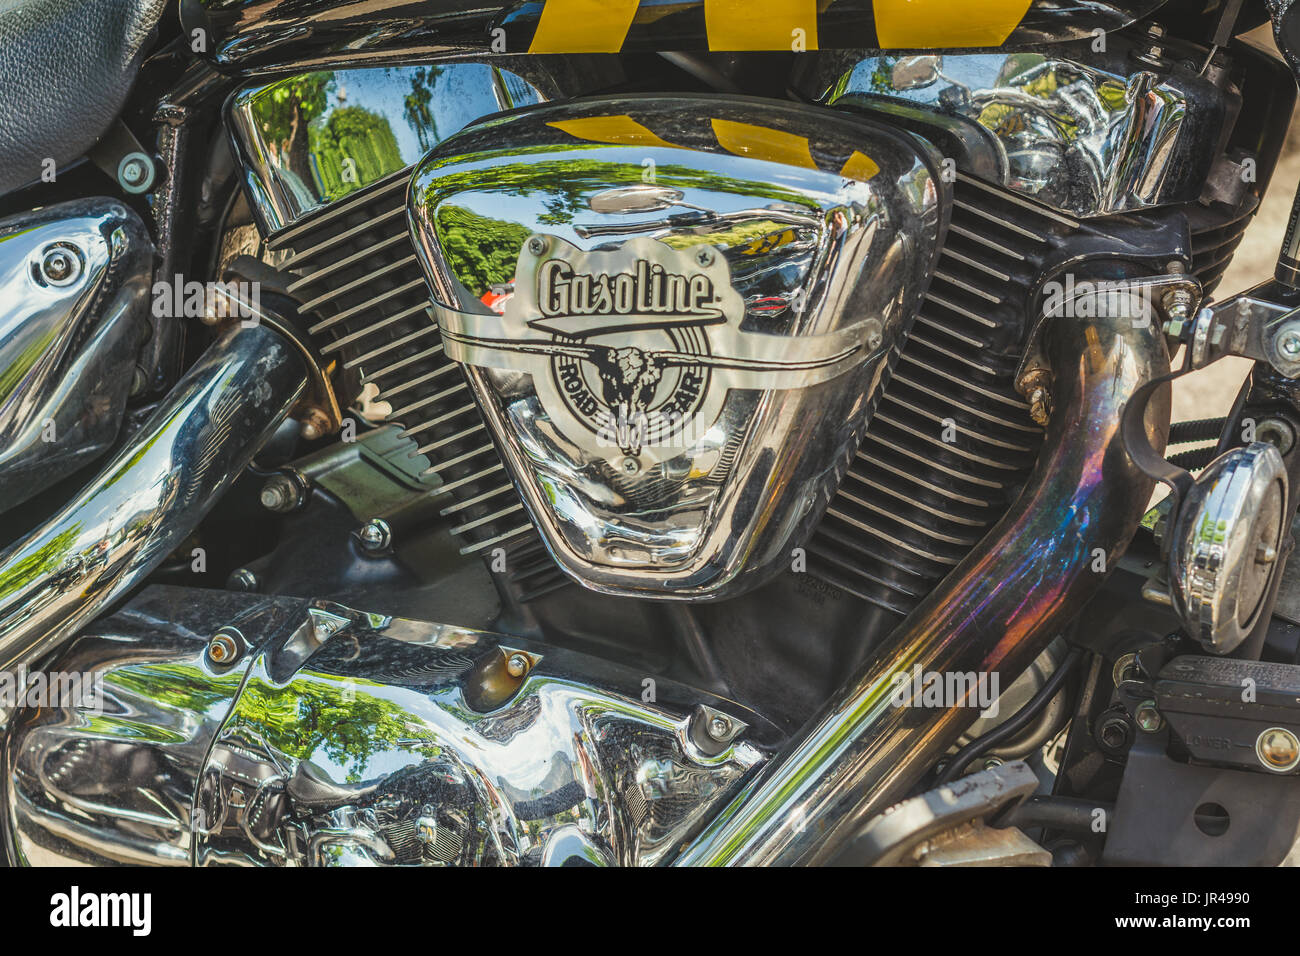 Show classic american motorcycles. Motorcycle parts details. Vintage filter effect Stock Photo